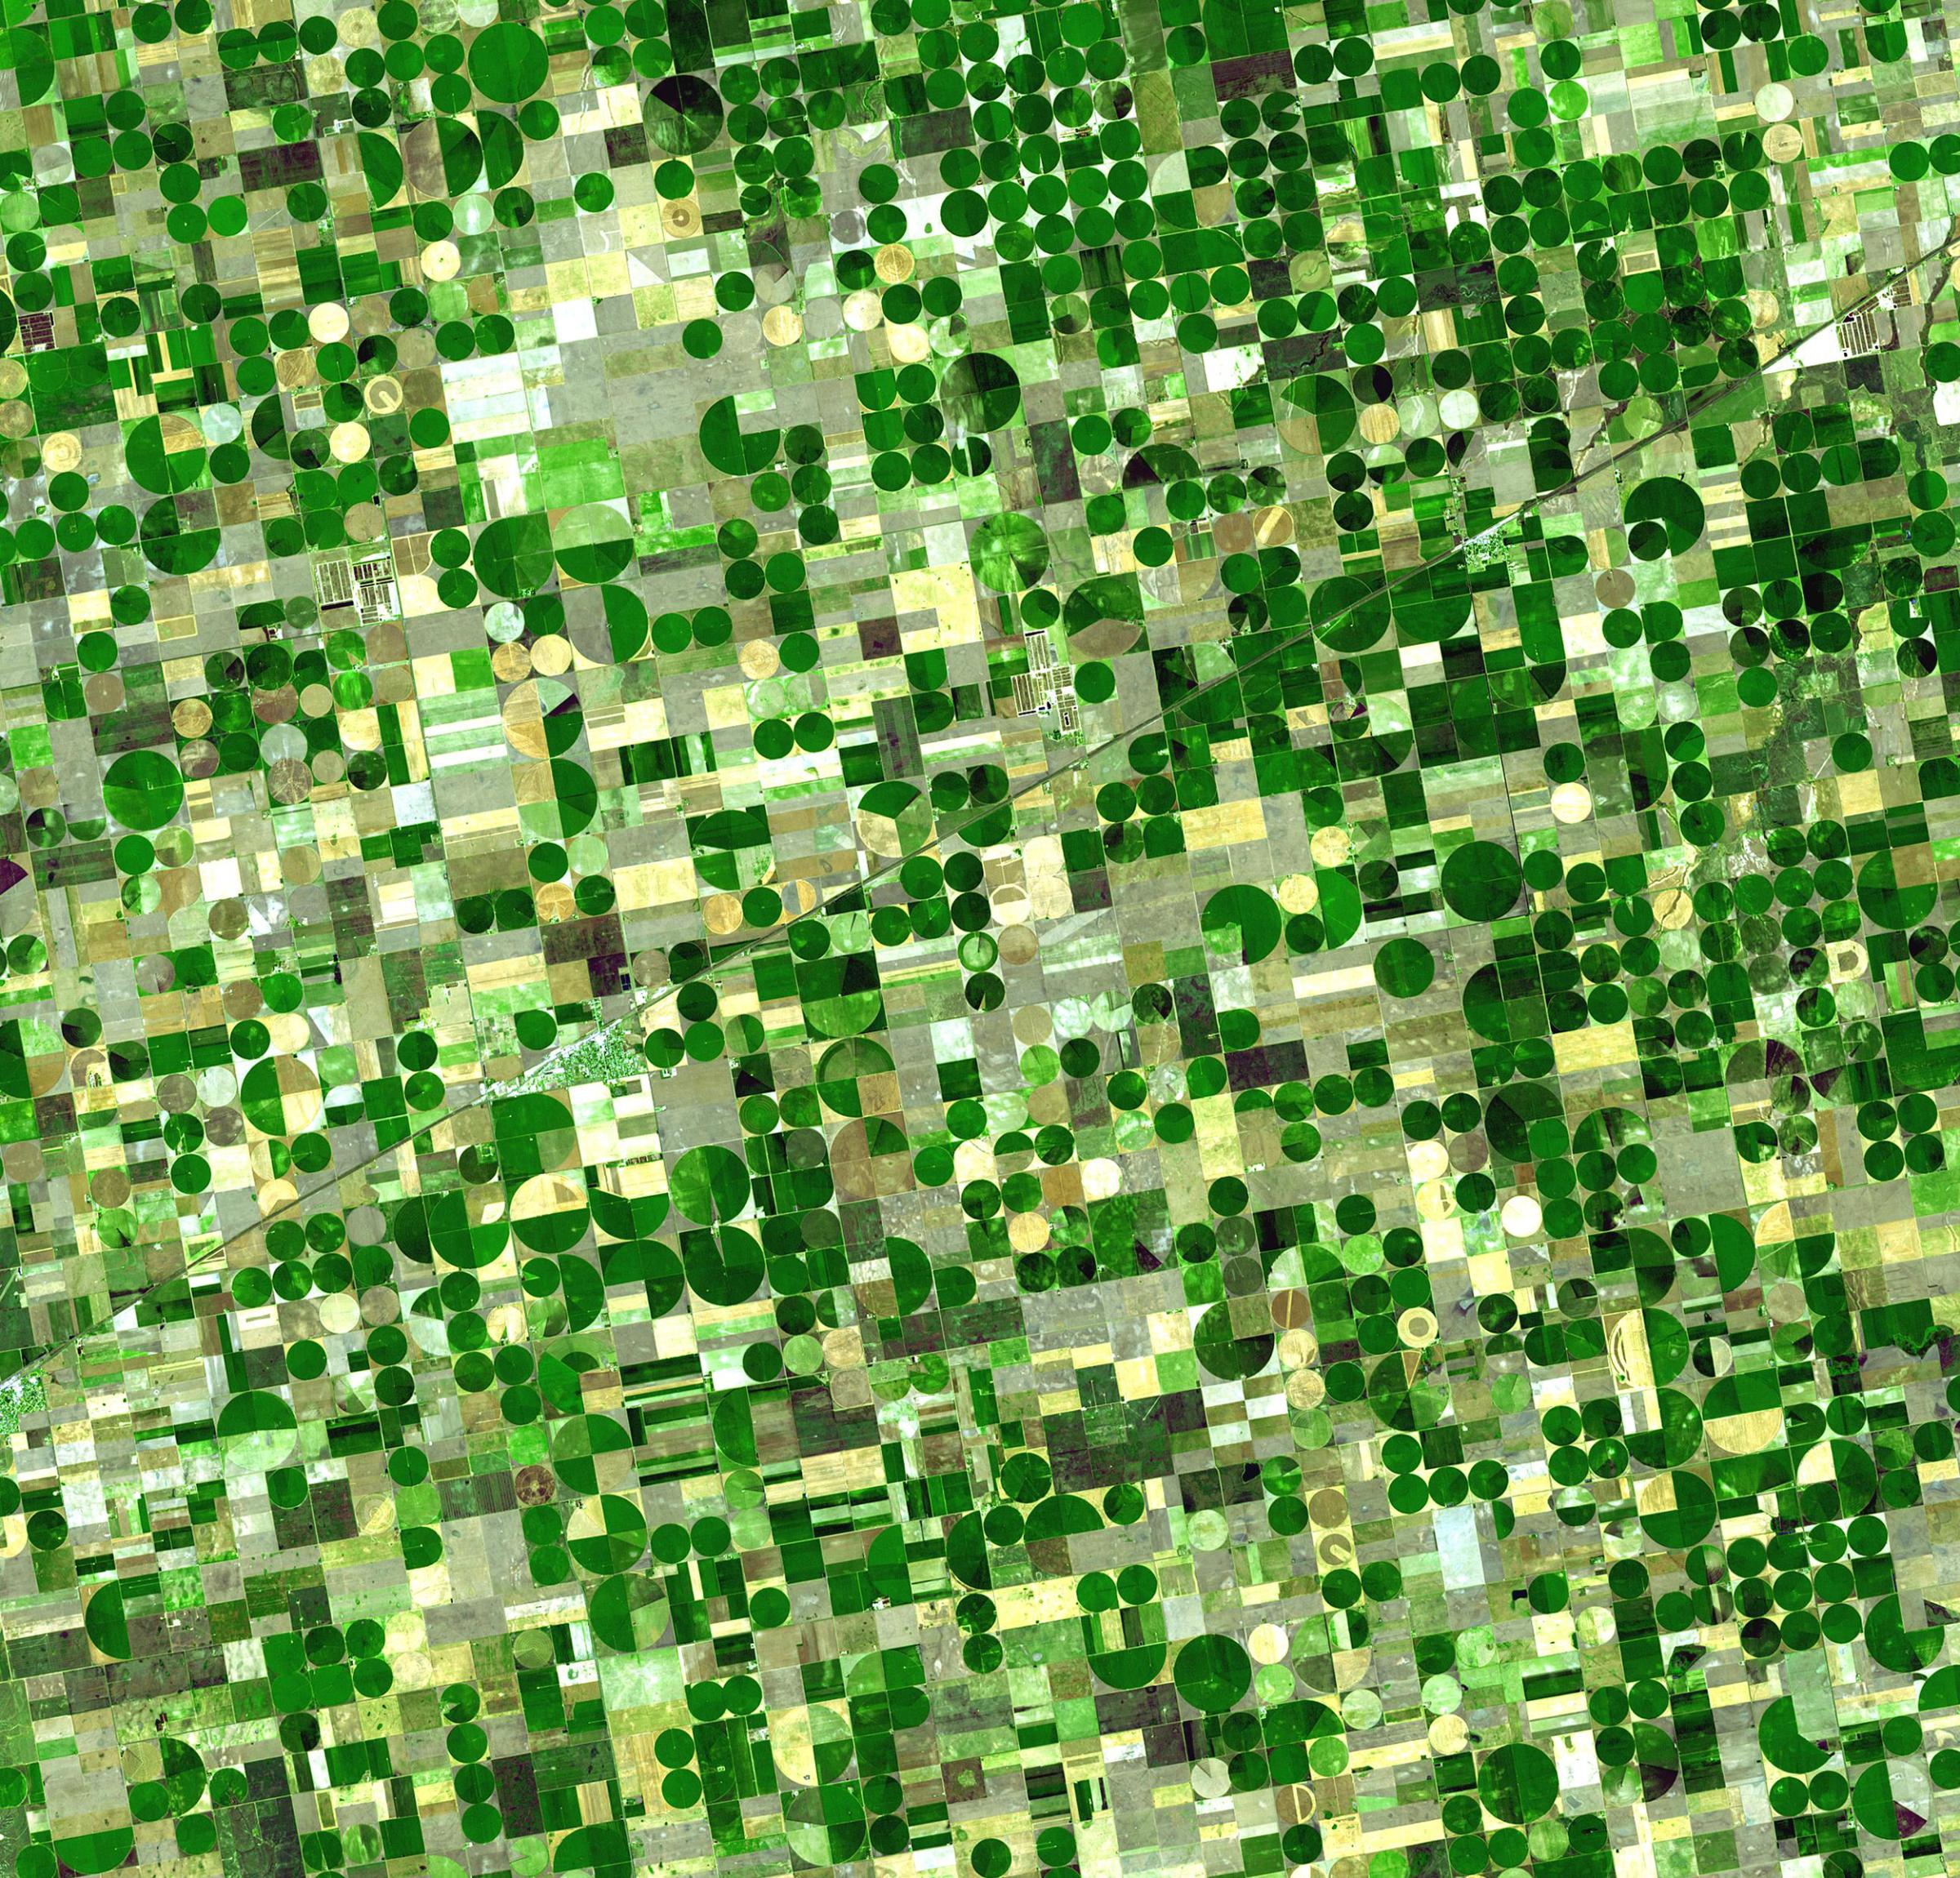 Finney County in southwestern Kansas is now irrigated cropland where once there was shortgrass prairie. Green areas in the image are healthy vegetation. Light colored cultivated fields are fallow or recently harvested. The image was acquired on June 24, 2001.